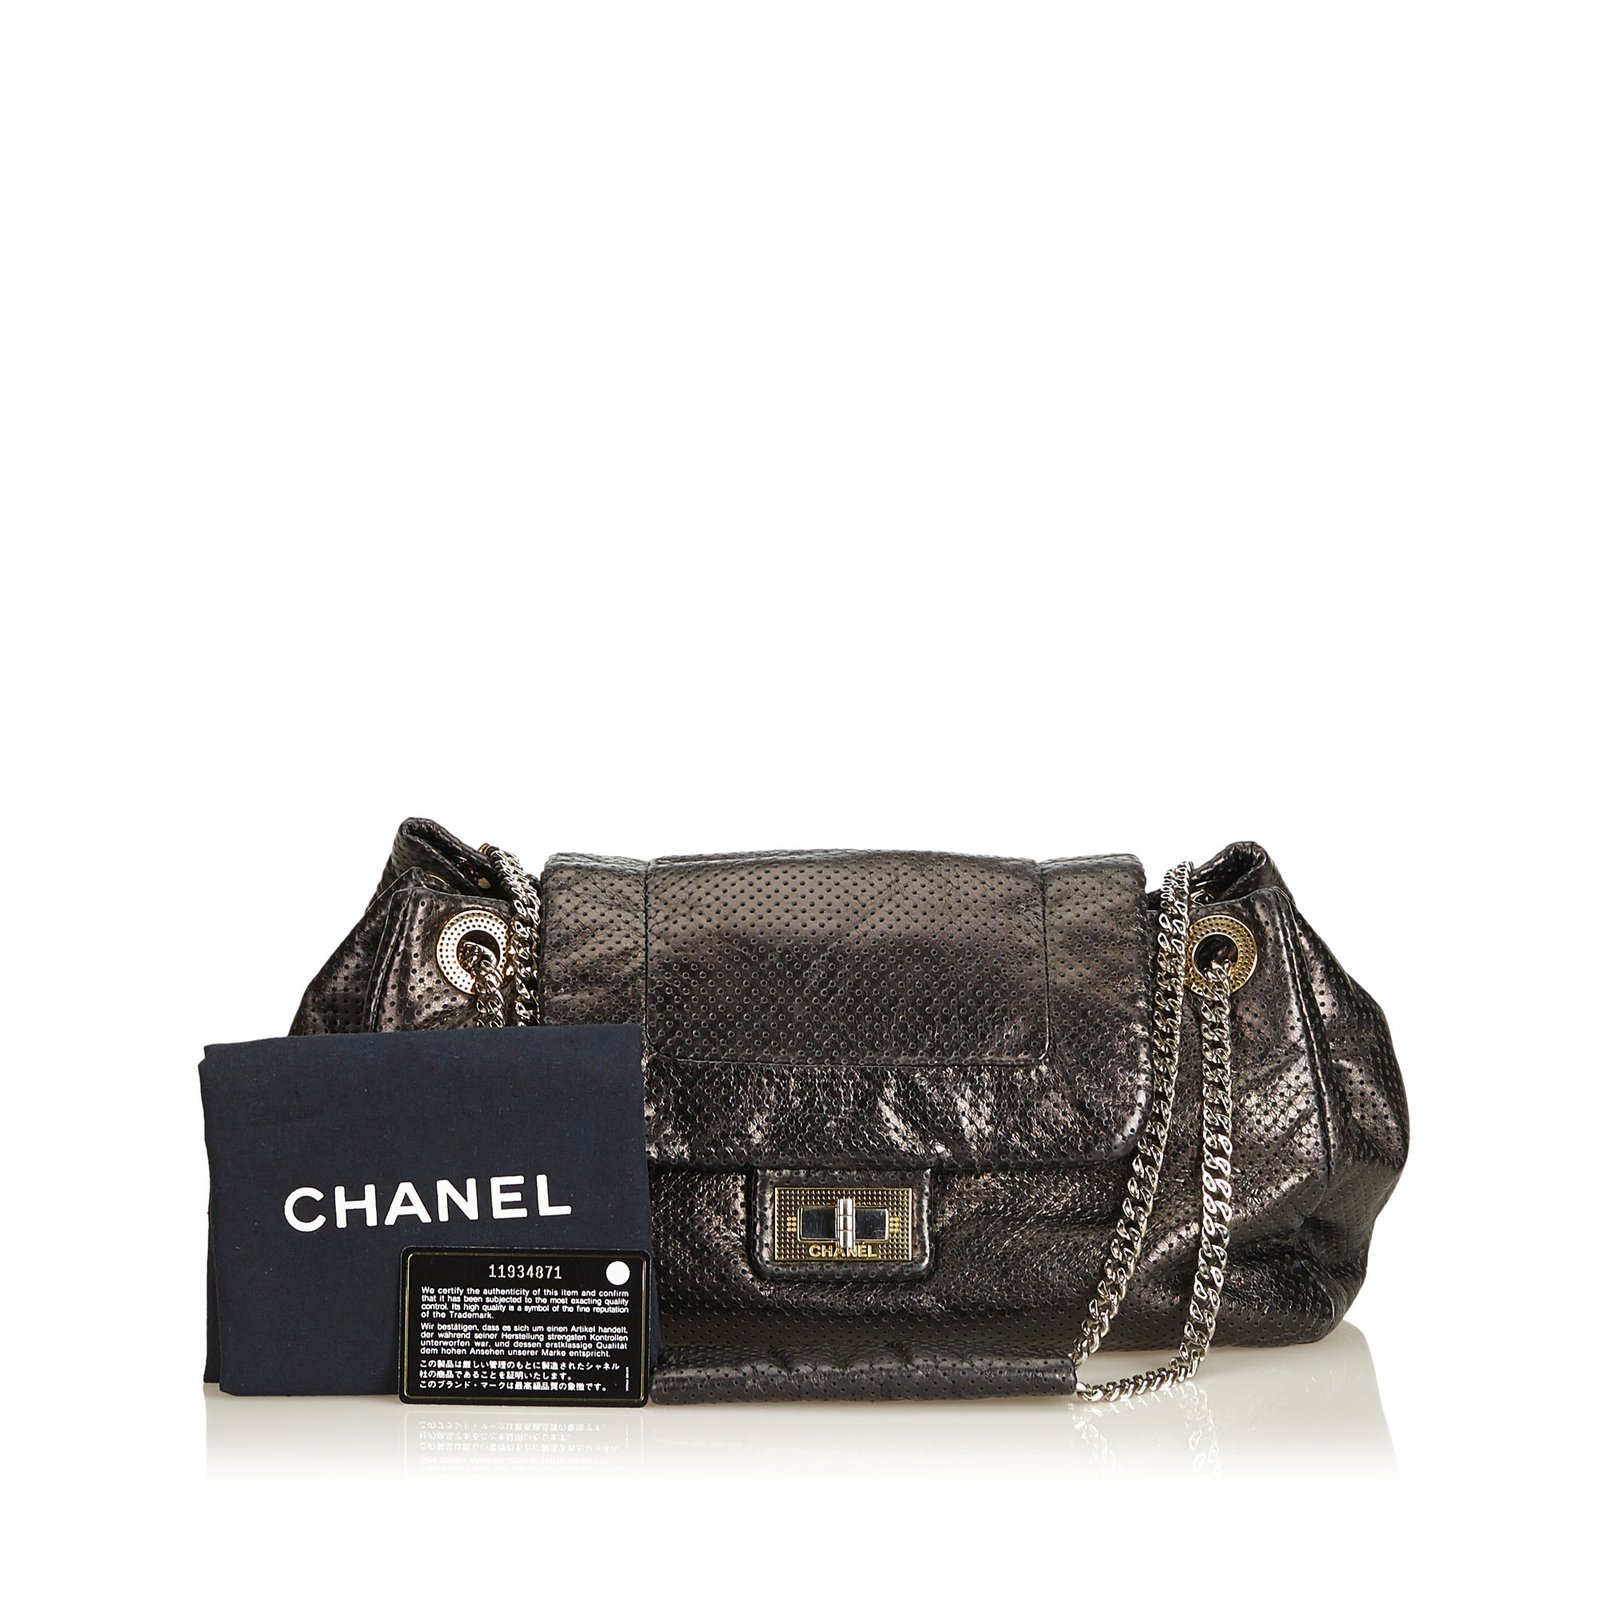 Chanel Gold, Metallic Perforated Drill Accordion Flap Bag